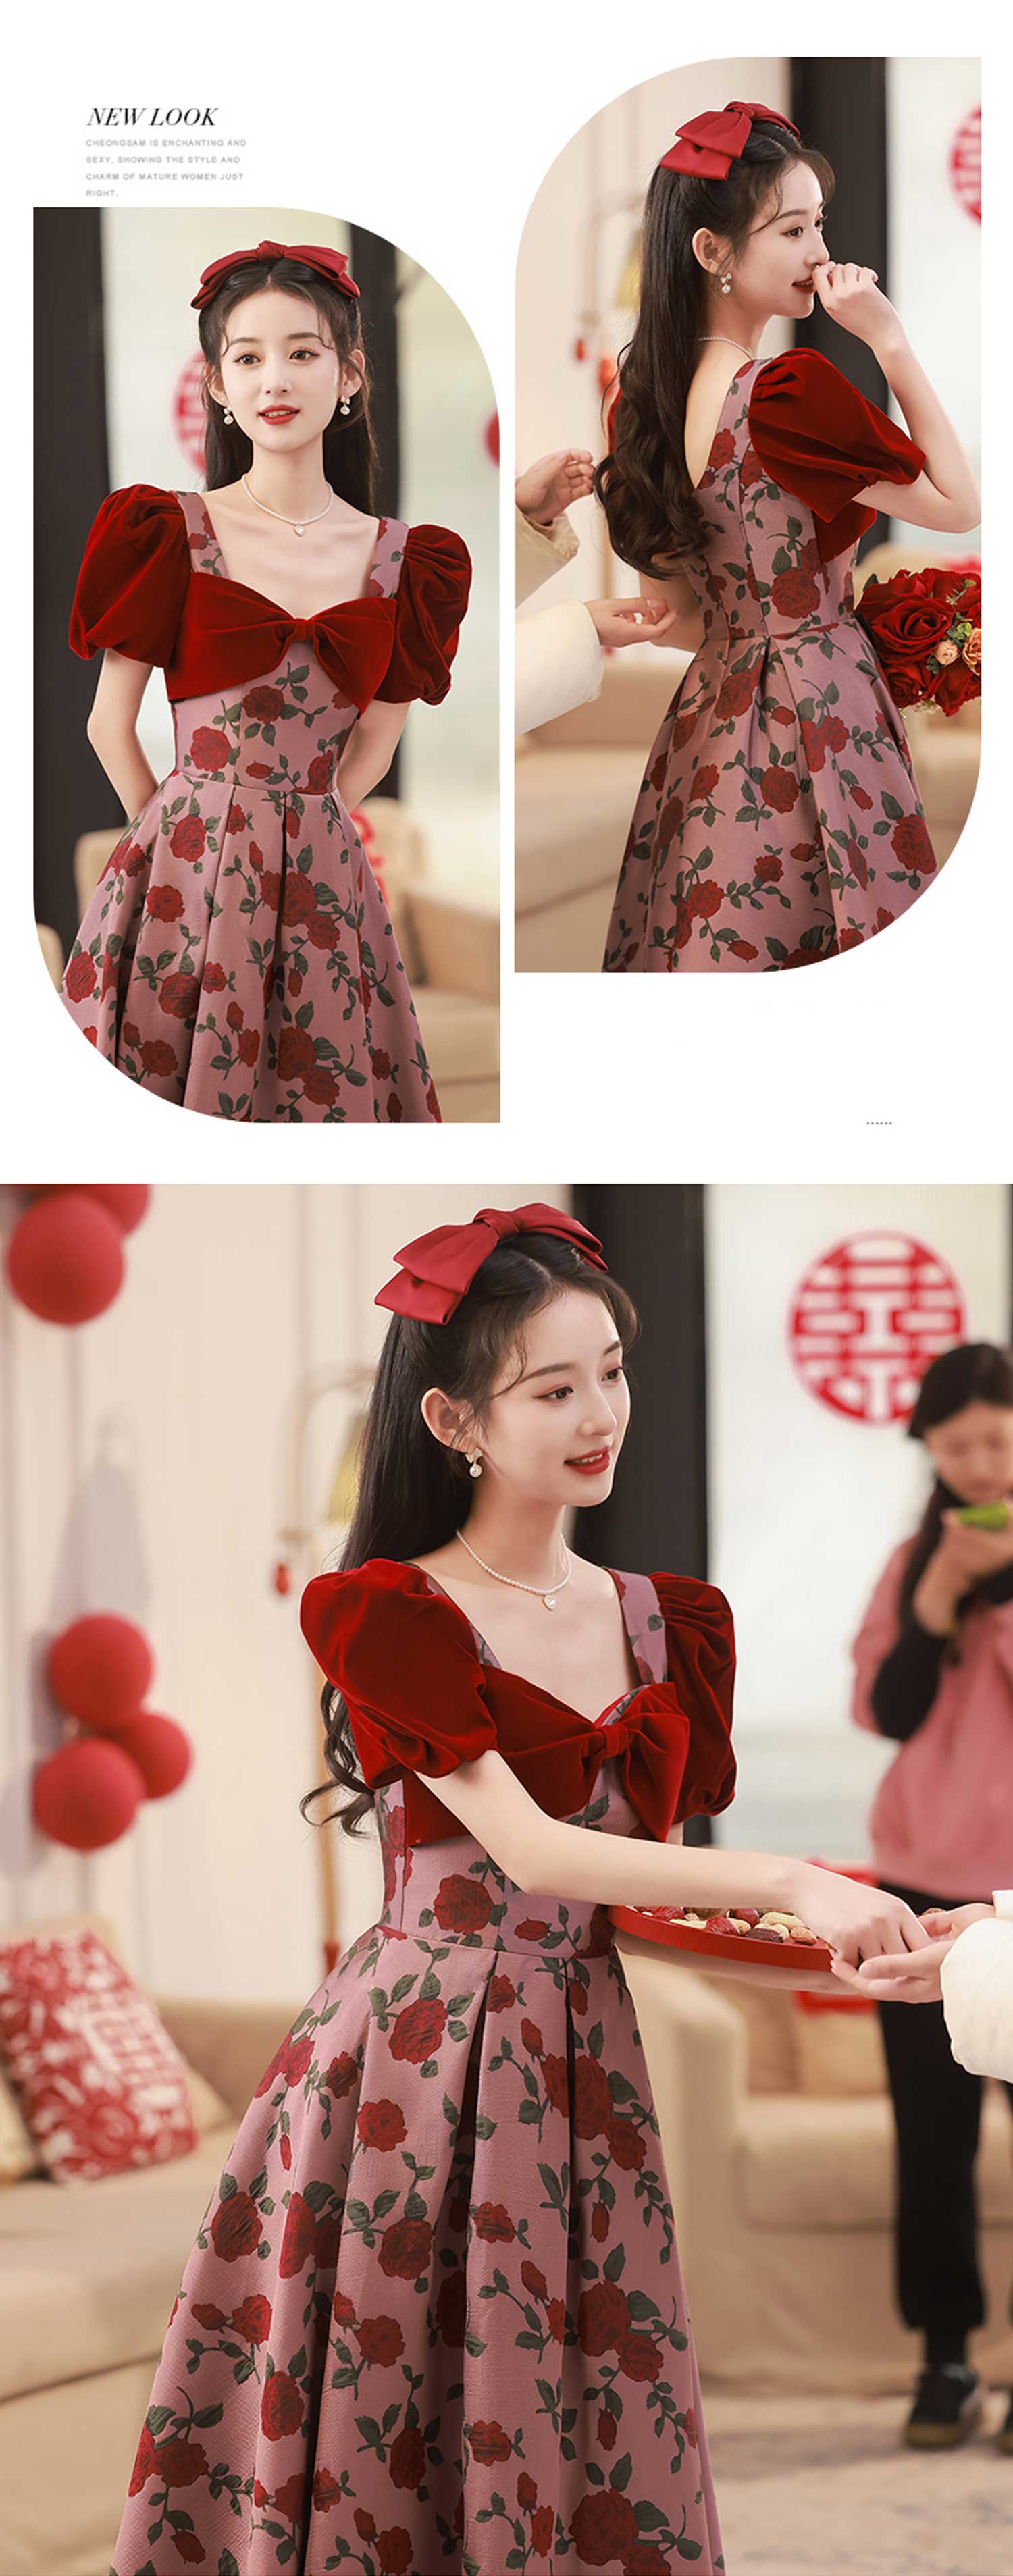 Aesthetic-Floral-Short-Sleeve-Mid-Length-Cocktail-Banquet-Party-Dress09